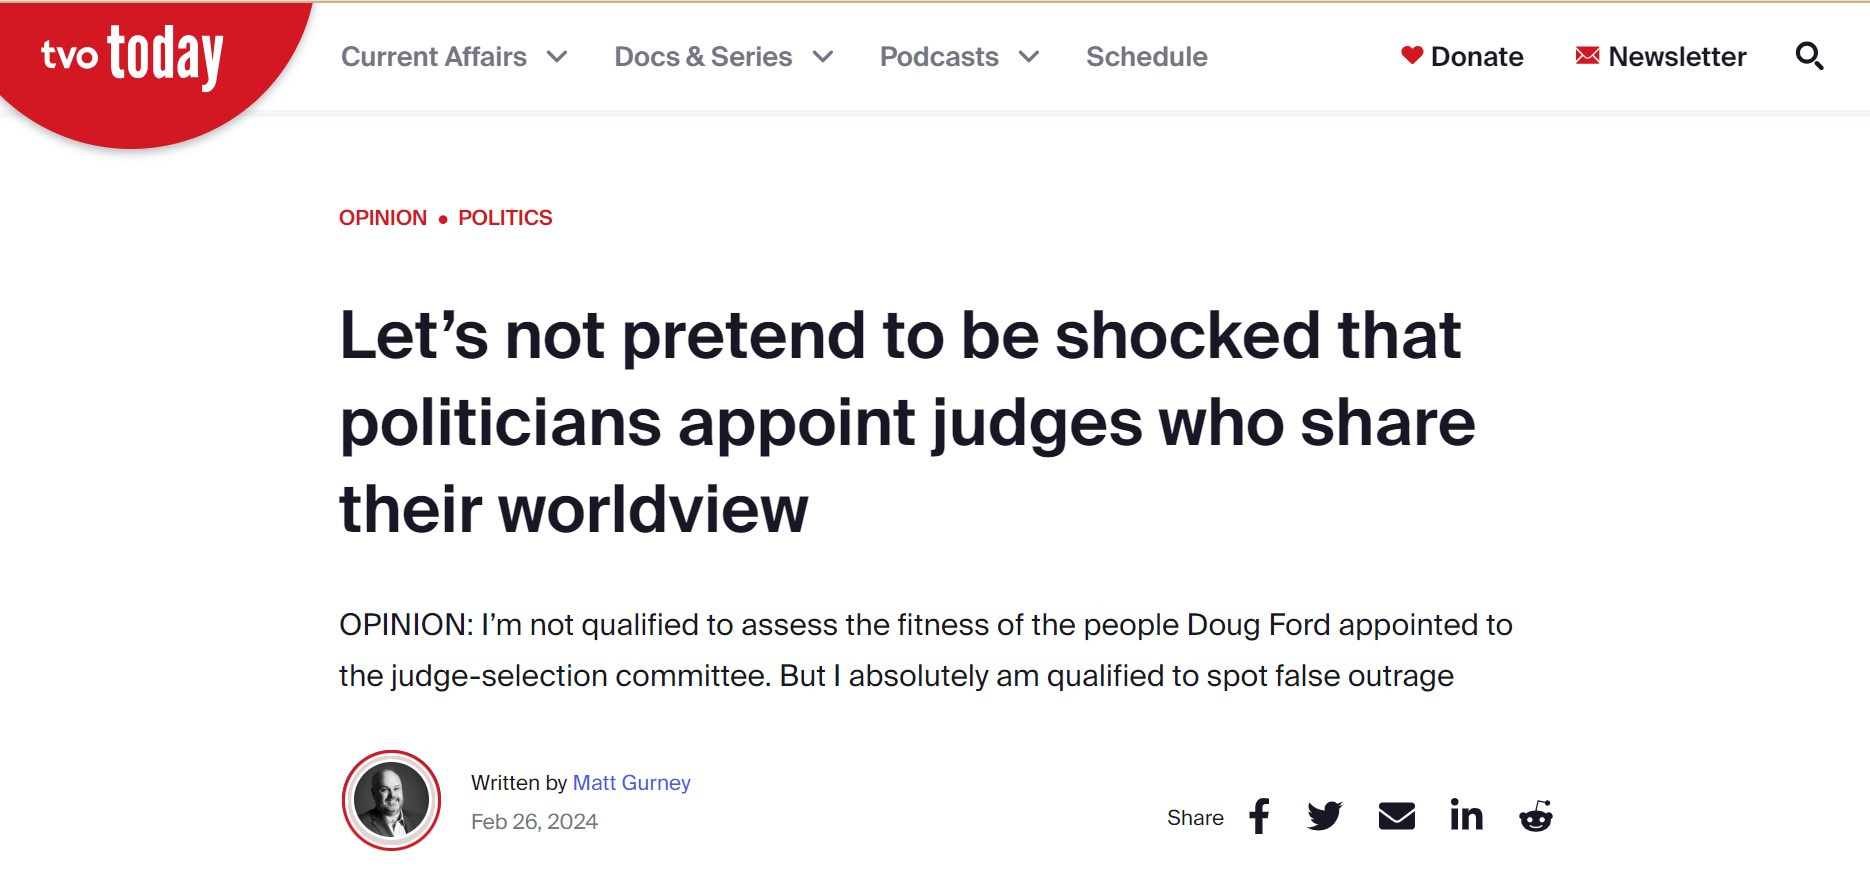 Ford's picks to choose judges are political operatives